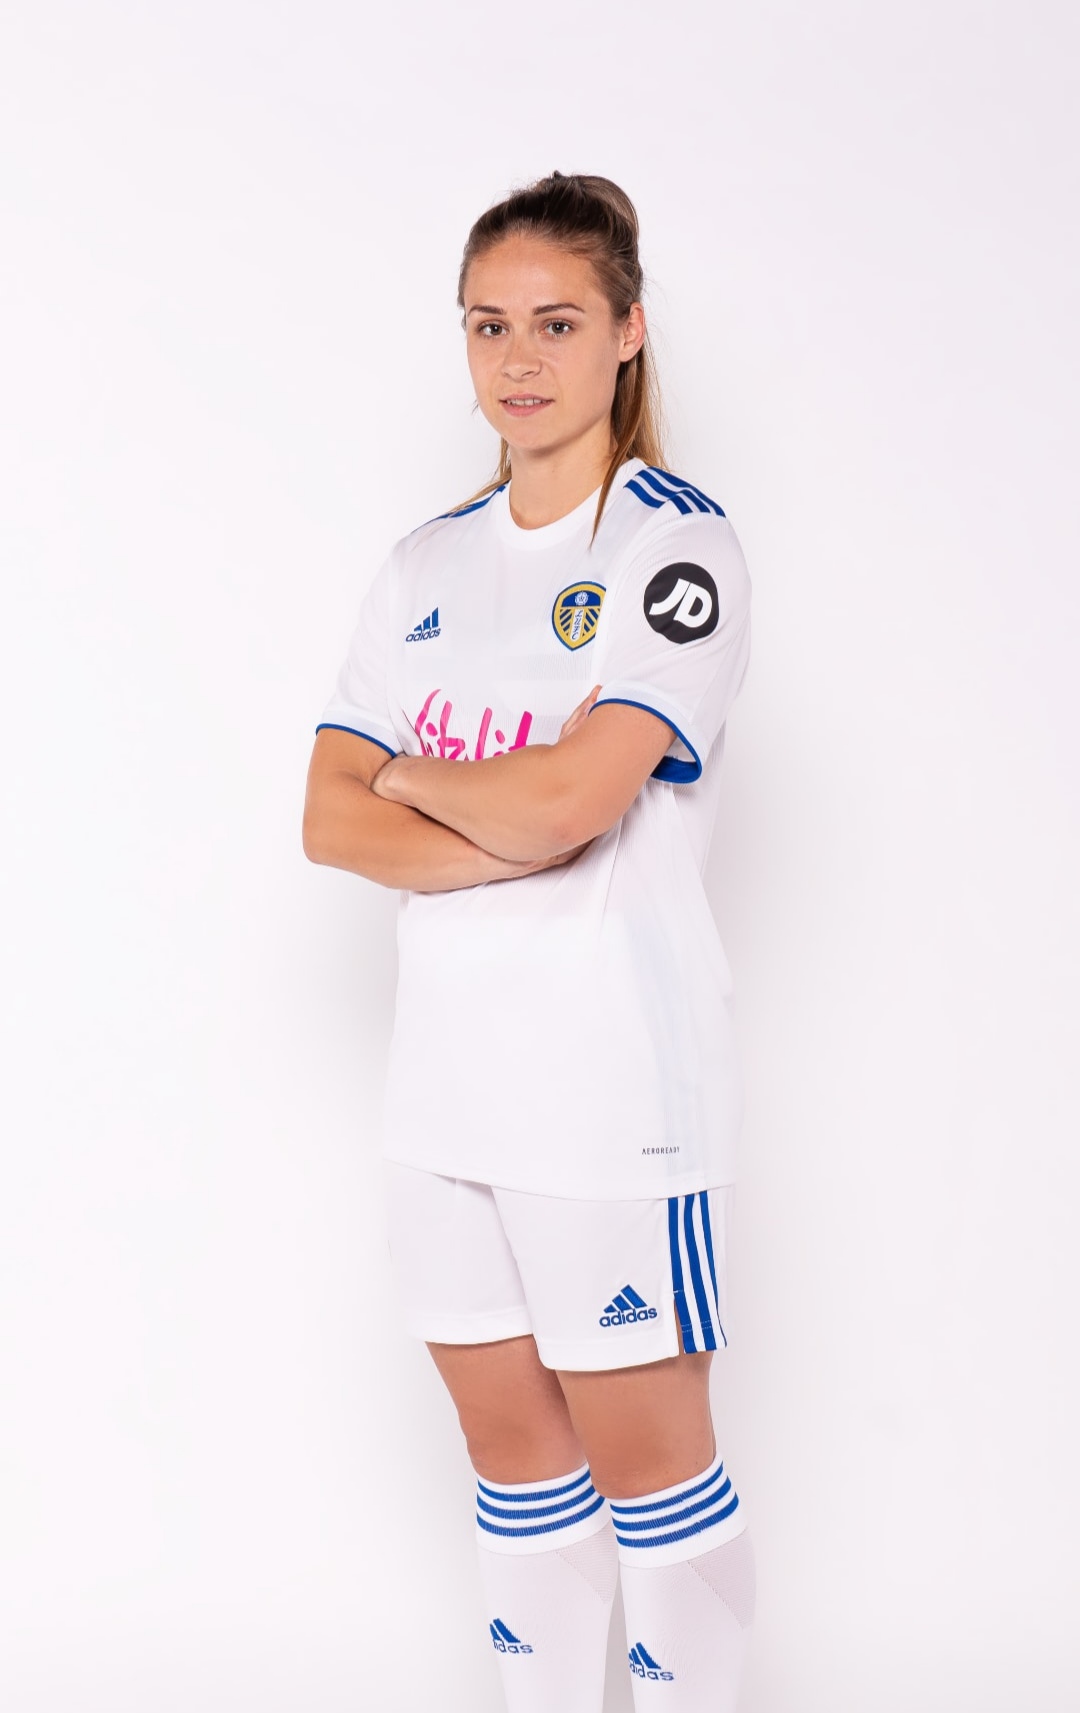 Josie Hewson stood with her arms folded in her Leeds United football kit, very professional.